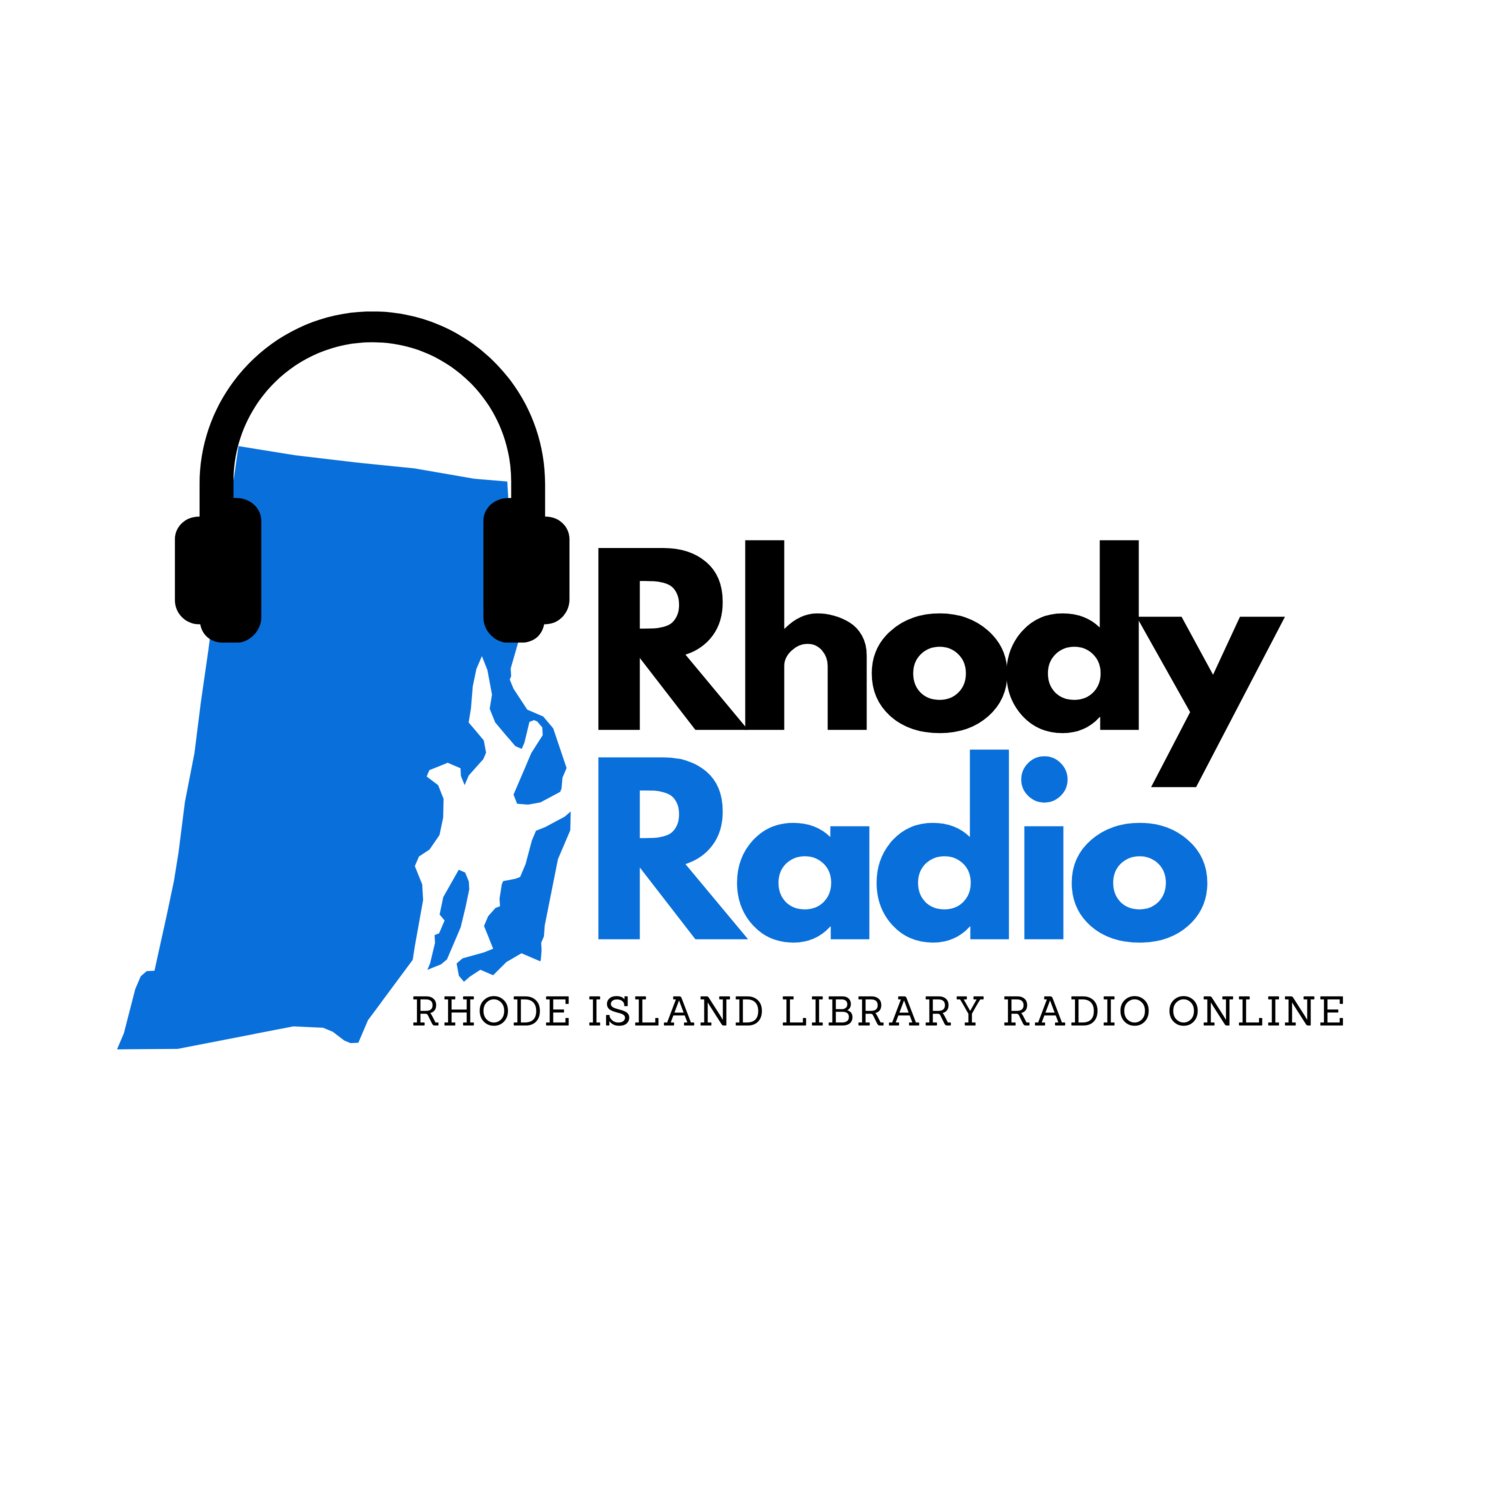 Rhody Radio Connects Rhode Island Libraries with Listeners